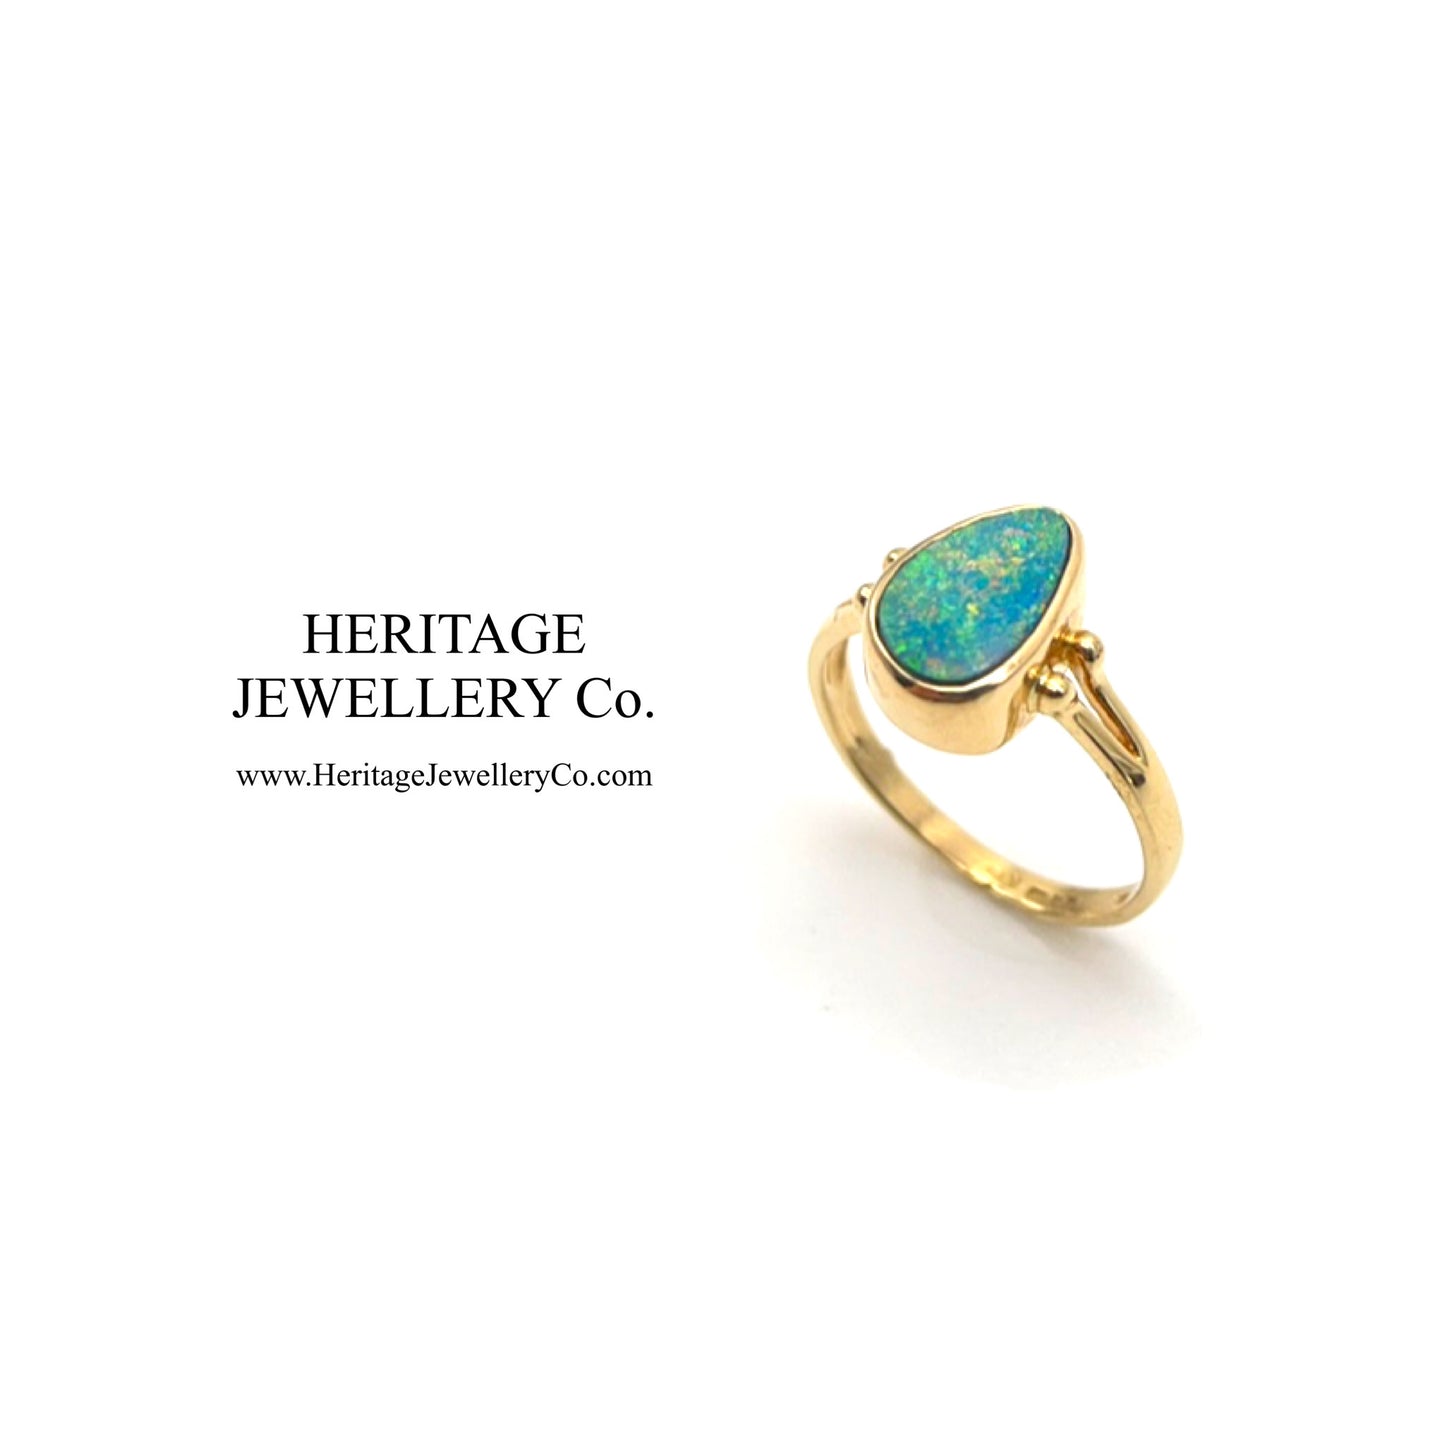 Vintage 14ct Gold Fiery Opal Ring